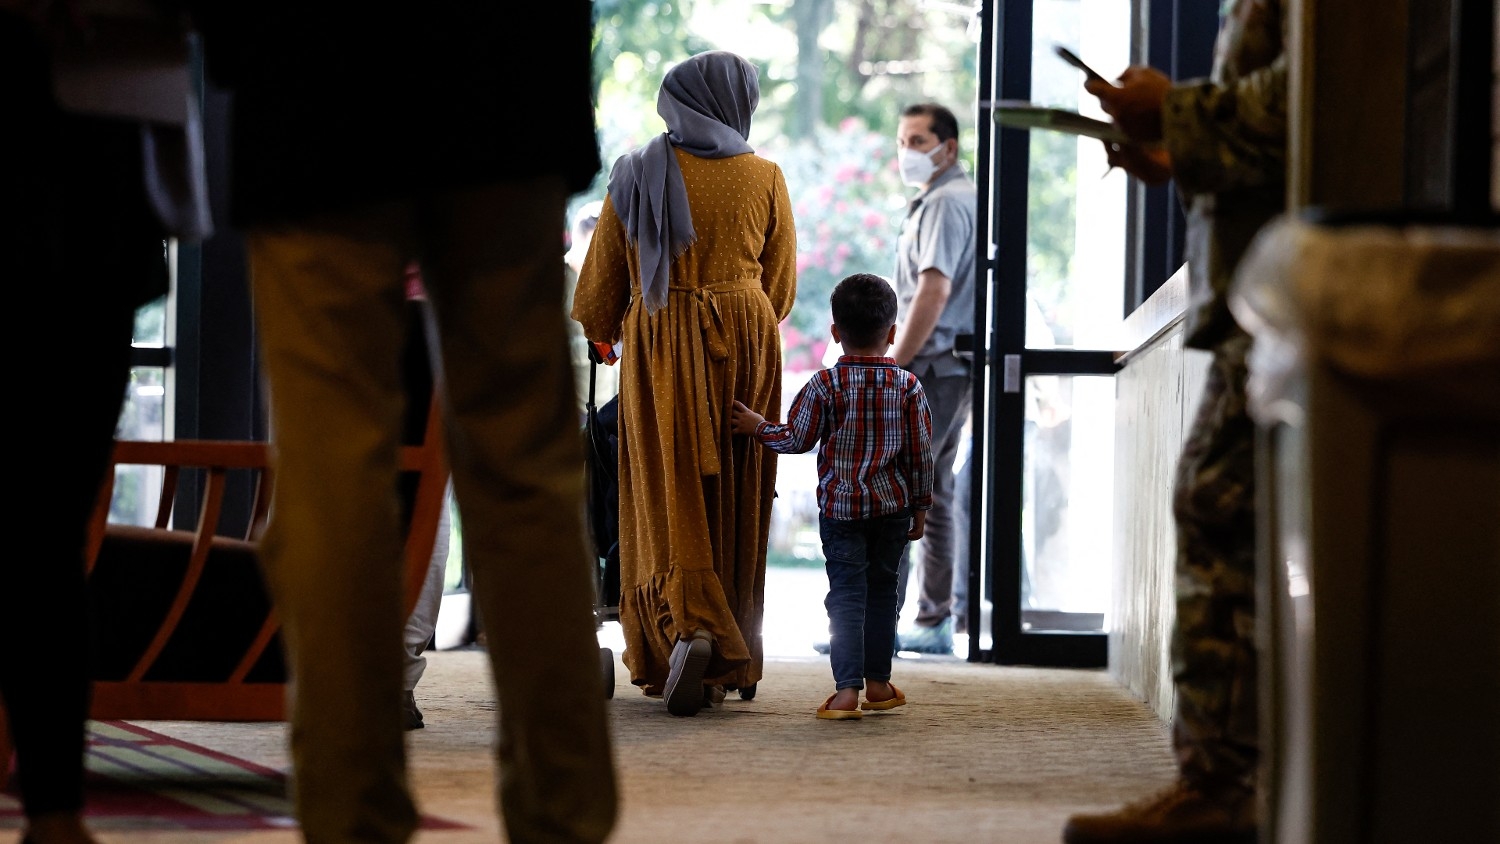 An Afghan national and her son walk through temporarily housing for Afghan nationals on 11 August 2022 in Leesburg, Virginia.